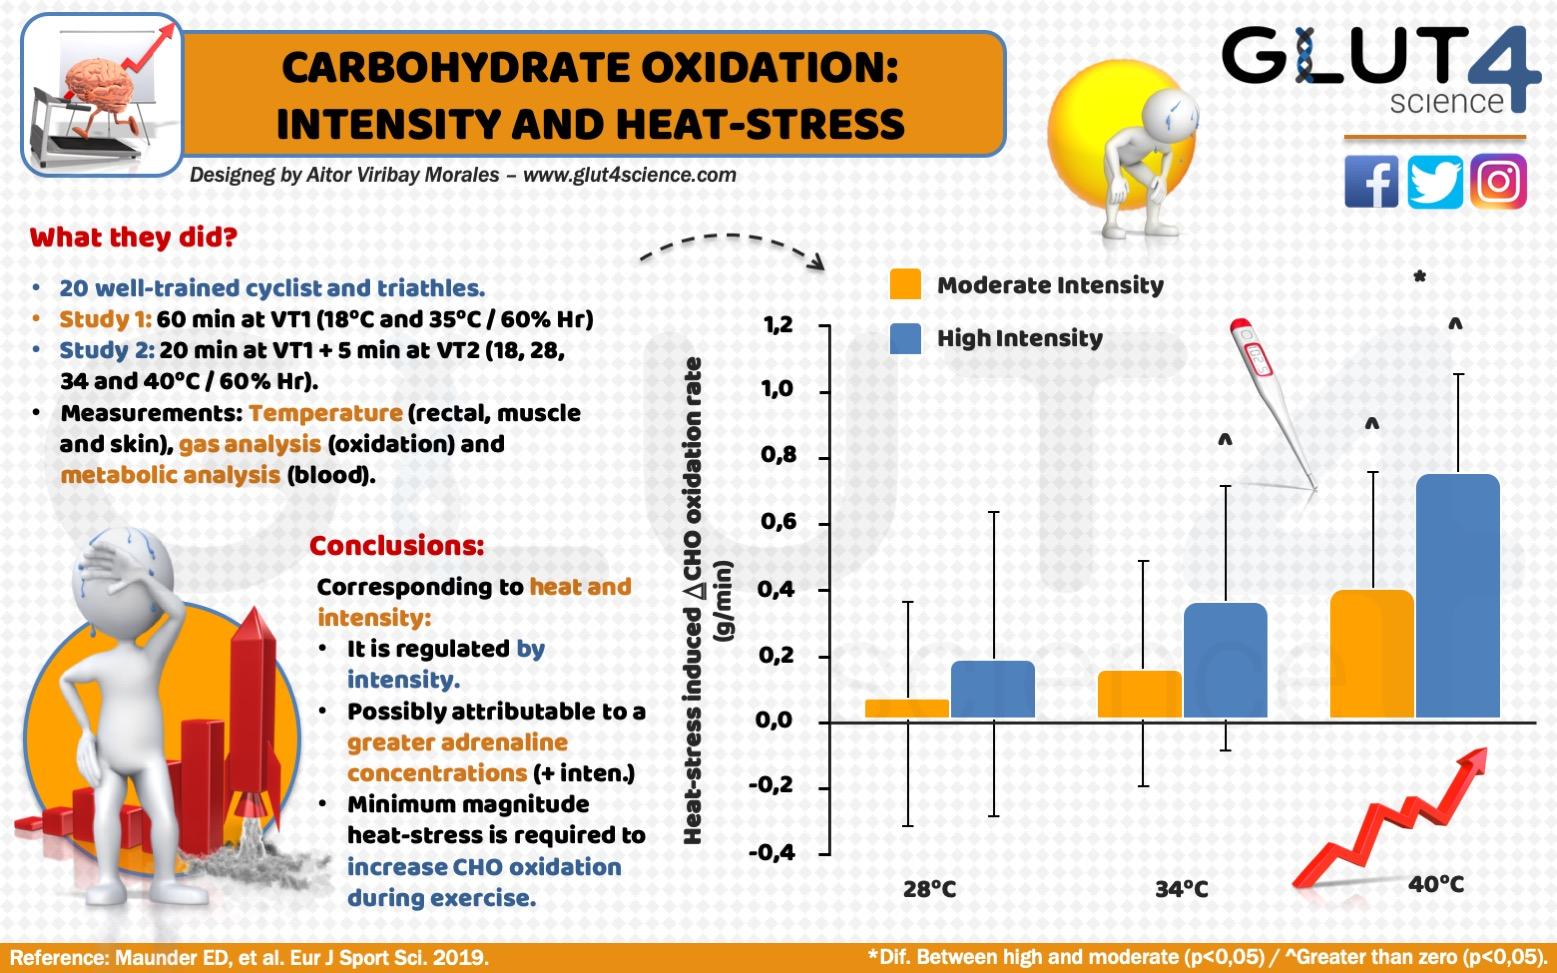 Effects of heat on carbohydrate oxidation